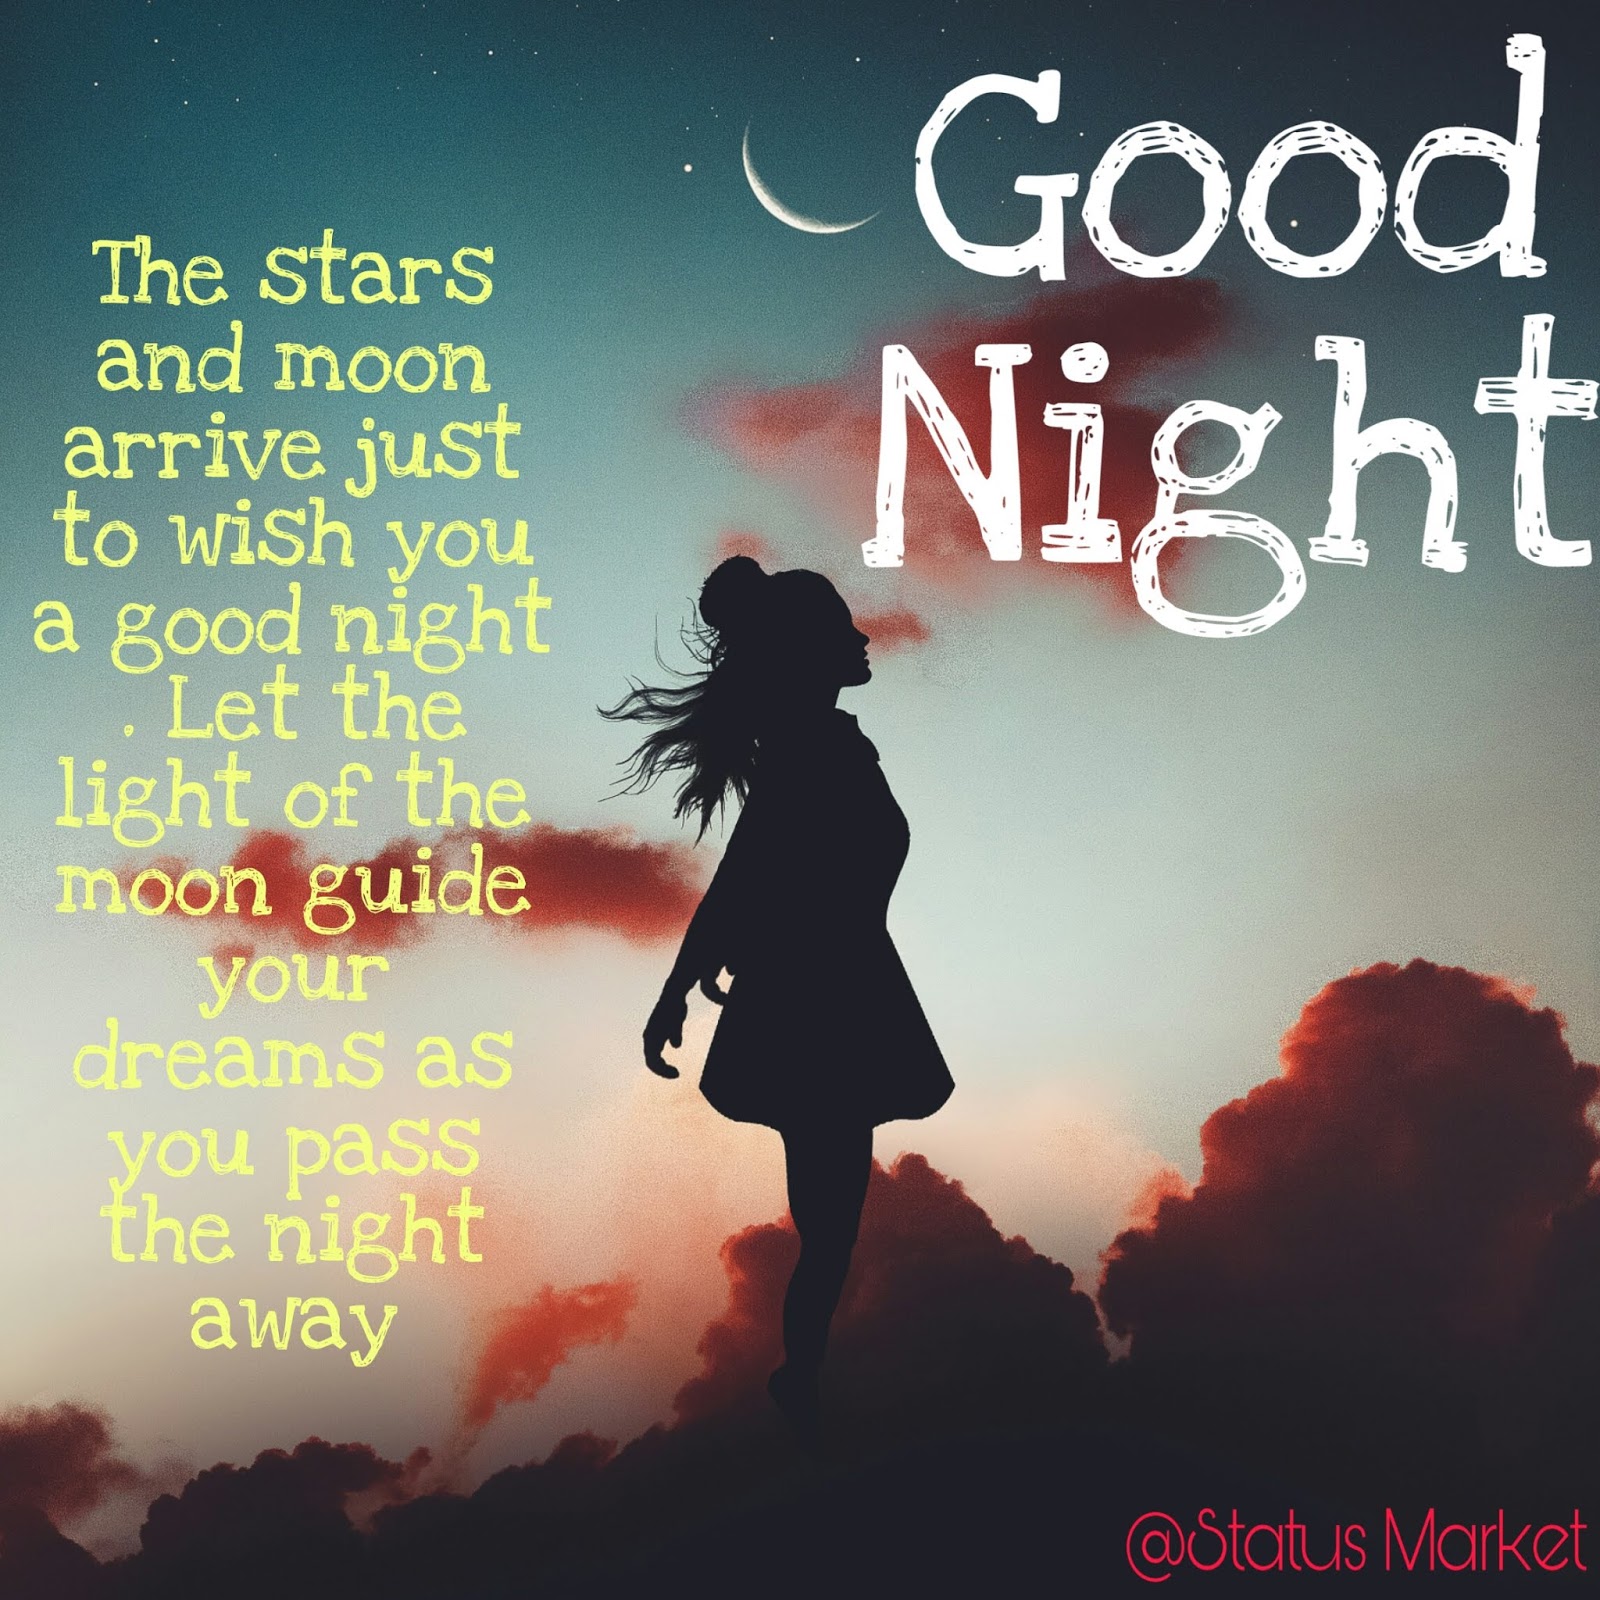 20+ Good Night Images For Whatsapp Free Download | Status Market